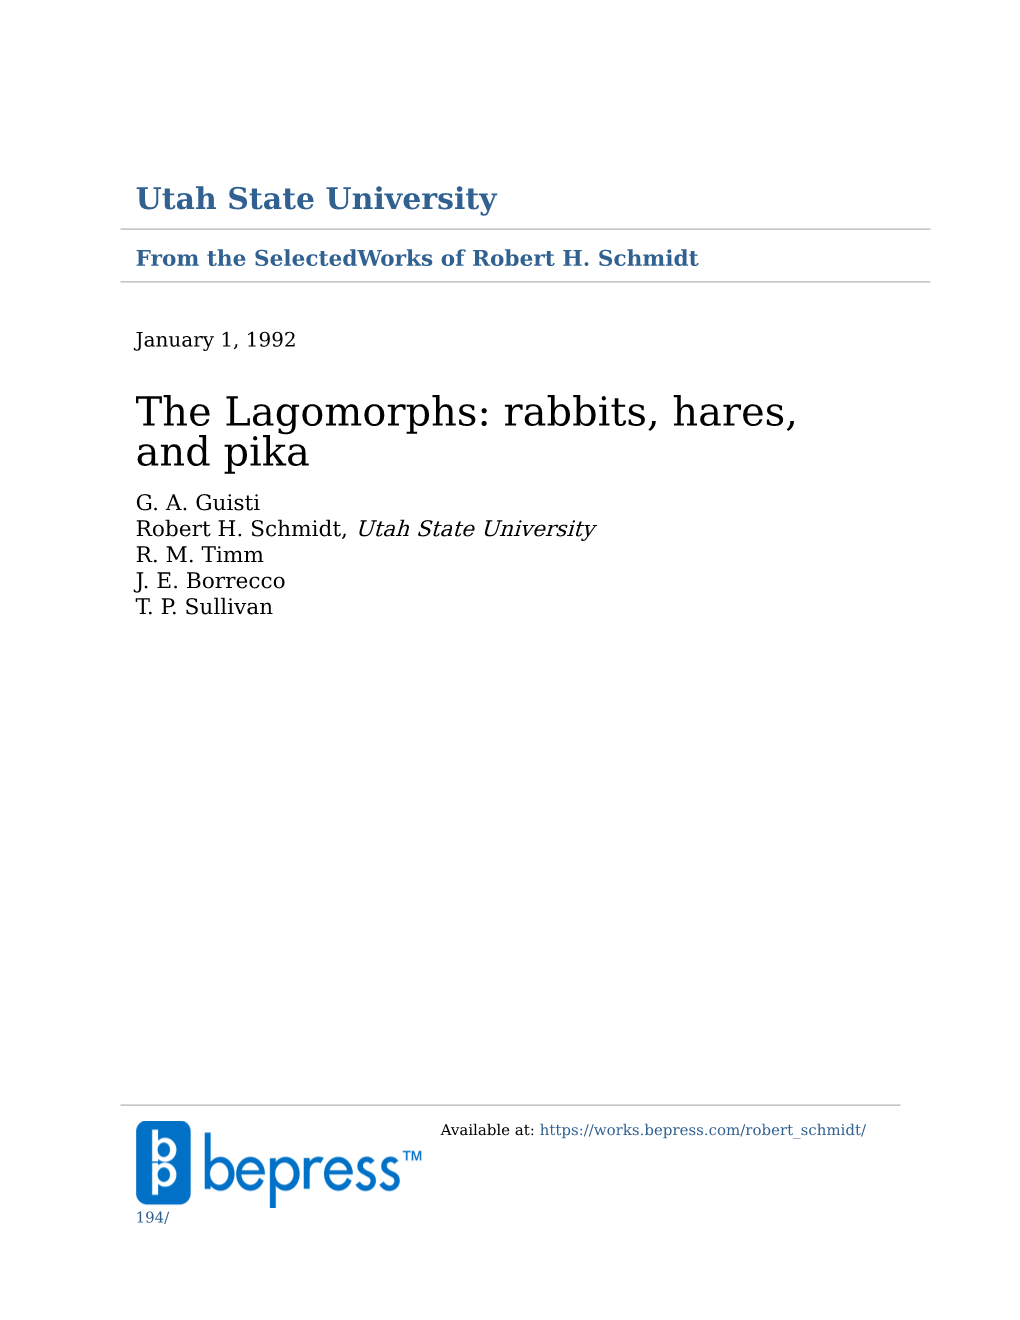 The Lagomorphs: Rabbits, Hares, and Pika G